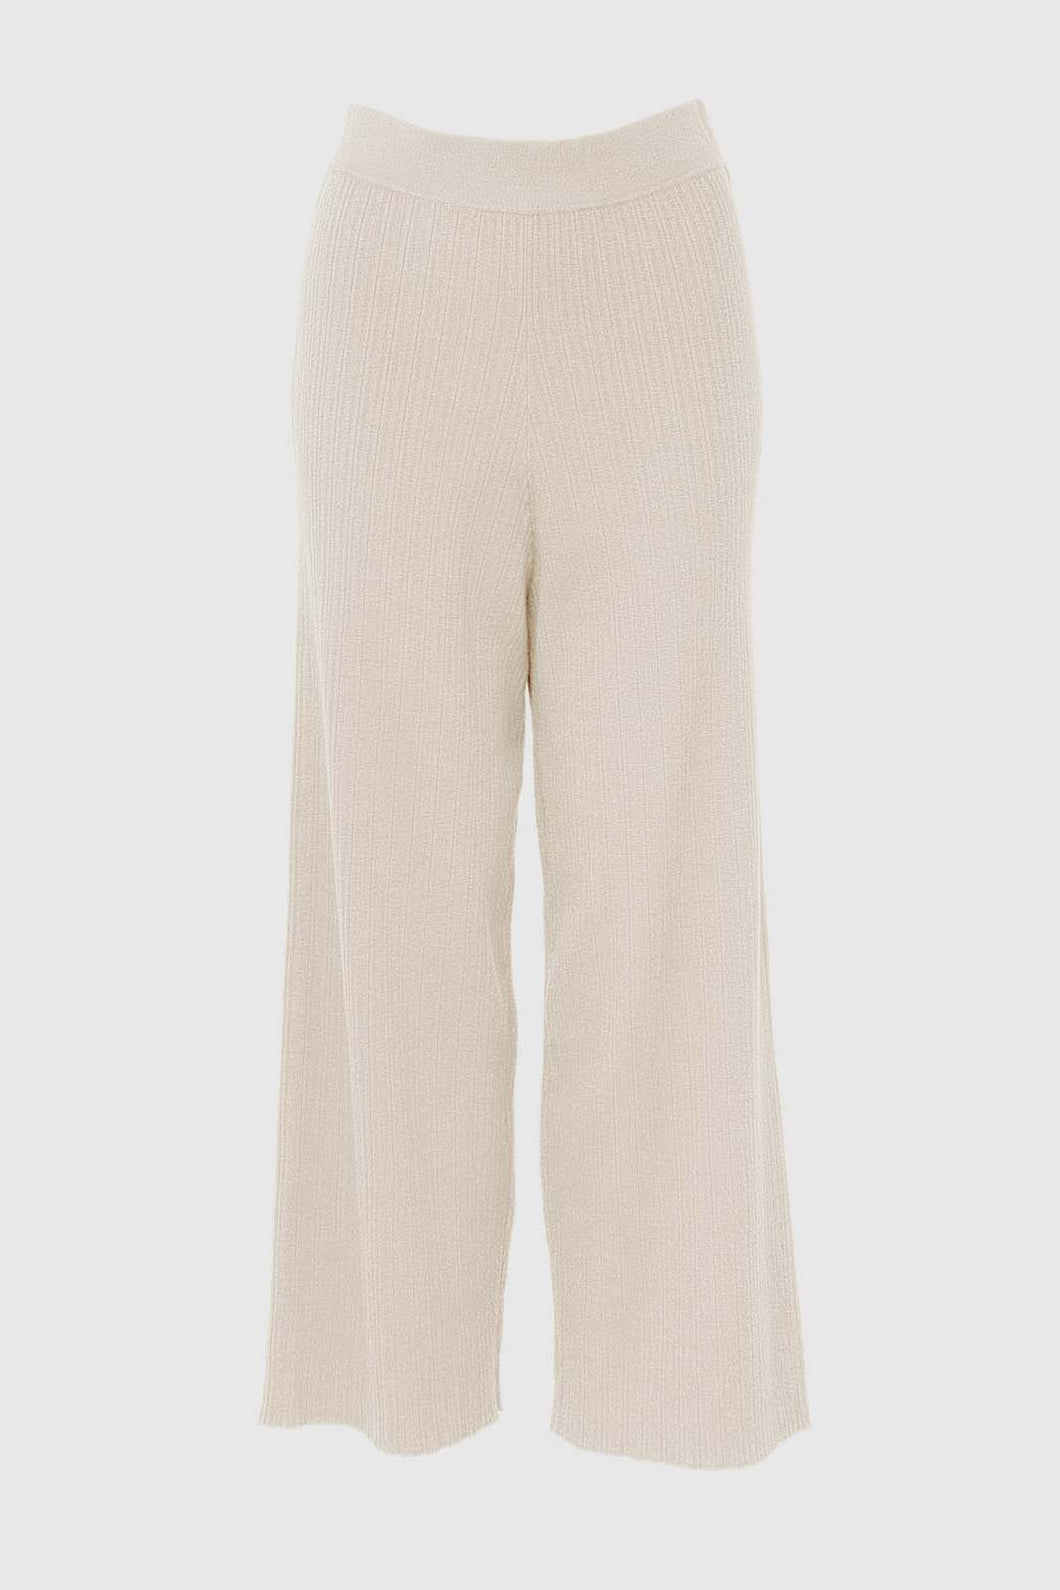 GIESELE KNIT RIBBED PANTS - SILVER LINING